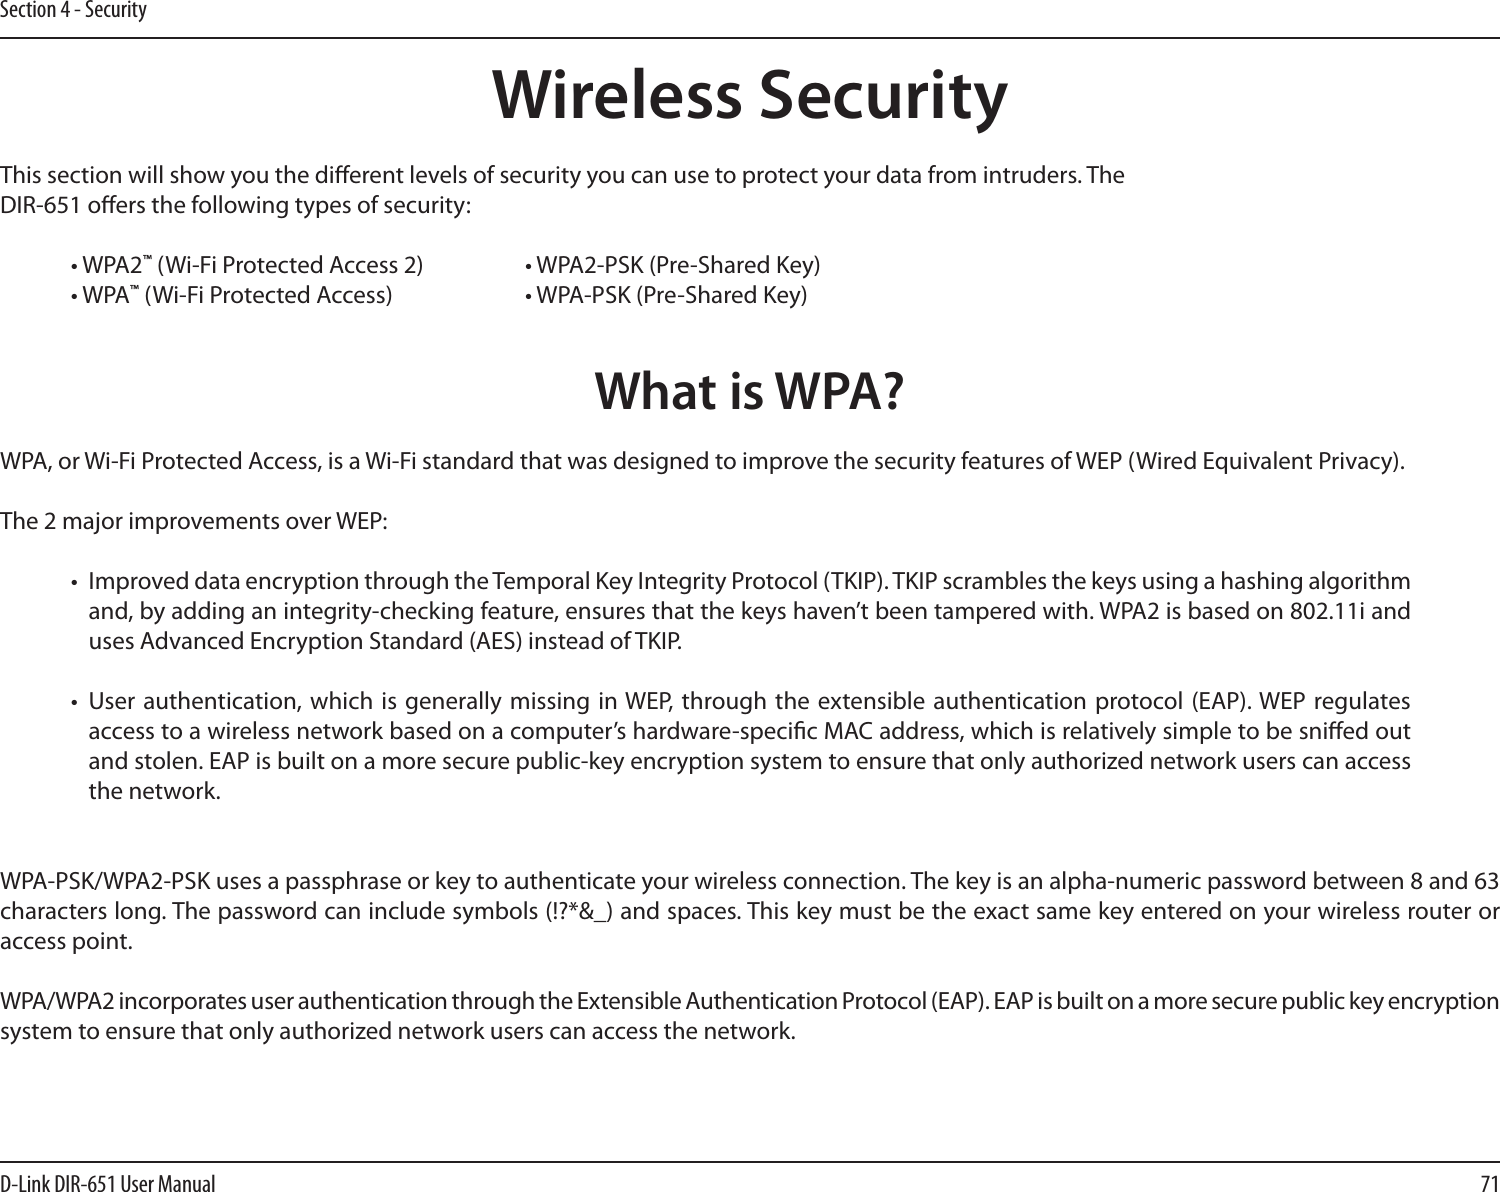 71D-Link DIR-651 User ManualSection 4 - SecurityWireless SecurityThis section will show you the dierent levels of security you can use to protect your data from intruders. The DIR-651 oers the following types of security:• WPA2™ (Wi-Fi Protected Access 2)     • WPA2-PSK (Pre-Shared Key)• WPA™ (Wi-Fi Protected Access)    • WPA-PSK (Pre-Shared Key)What is WPA?WPA, or Wi-Fi Protected Access, is a Wi-Fi standard that was designed to improve the security features of WEP (Wired Equivalent Privacy).  The 2 major improvements over WEP: •  Improved data encryption through the Temporal Key Integrity Protocol (TKIP). TKIP scrambles the keys using a hashing algorithm and, by adding an integrity-checking feature, ensures that the keys haven’t been tampered with. WPA2 is based on 802.11i and uses Advanced Encryption Standard (AES) instead of TKIP.•  User authentication, which is generally missing in WEP, through the  extensible authentication protocol (EAP). WEP regulates access to a wireless network based on a computer’s hardware-specic MAC address, which is relatively simple to be snied out and stolen. EAP is built on a more secure public-key encryption system to ensure that only authorized network users can access the network.WPA-PSK/WPA2-PSK uses a passphrase or key to authenticate your wireless connection. The key is an alpha-numeric password between 8 and 63 characters long. The password can include symbols (!?*&amp;_) and spaces. This key must be the exact same key entered on your wireless router or access point.WPA/WPA2 incorporates user authentication through the Extensible Authentication Protocol (EAP). EAP is built on a more secure public key encryption system to ensure that only authorized network users can access the network.